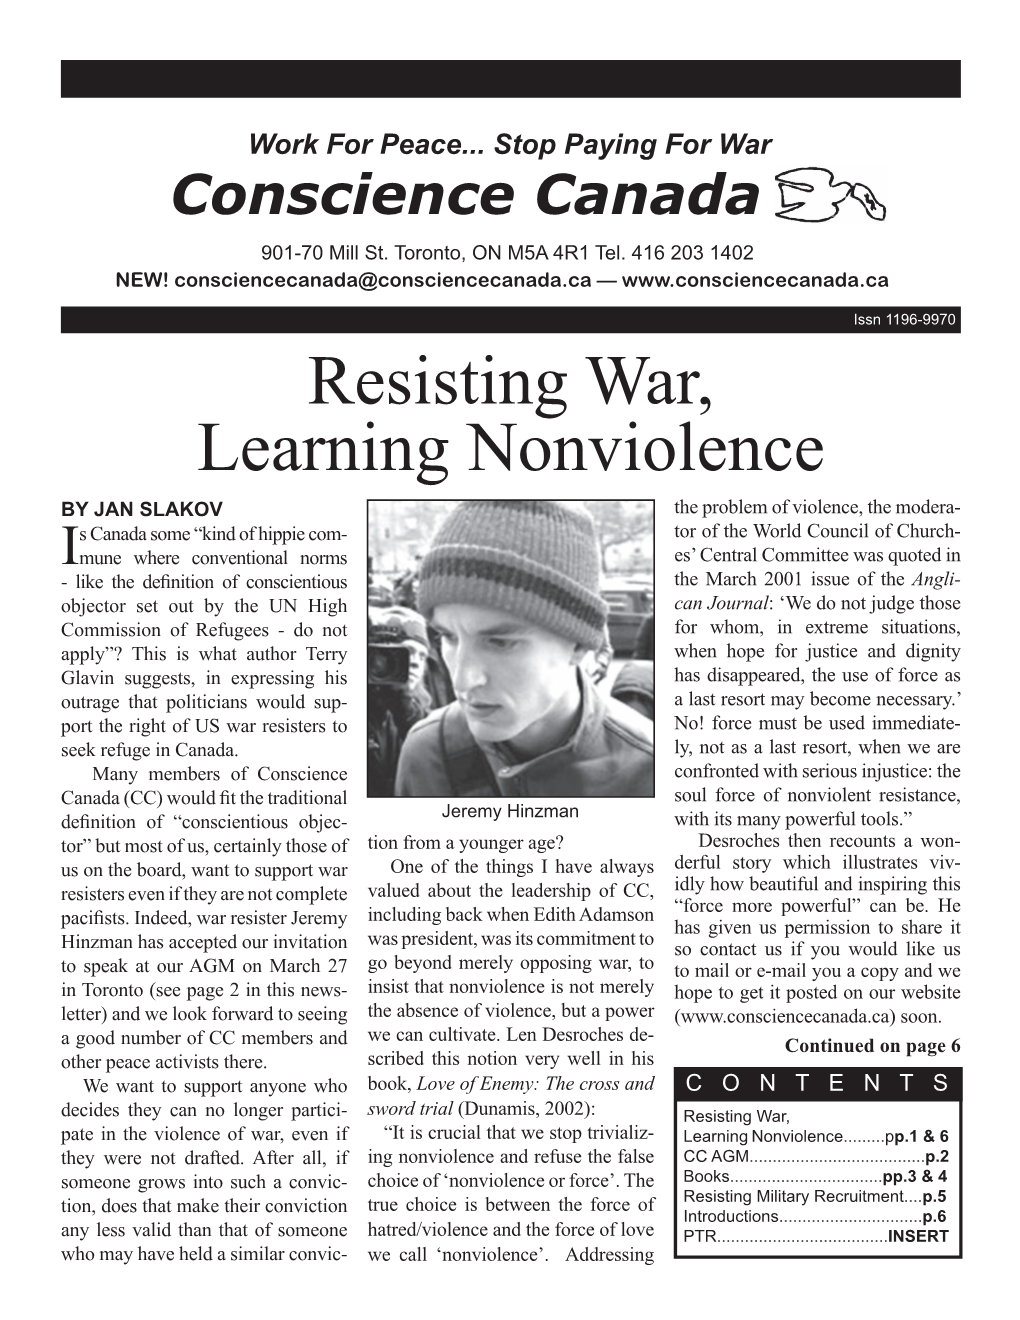 Resisting War, Learning Nonviolence